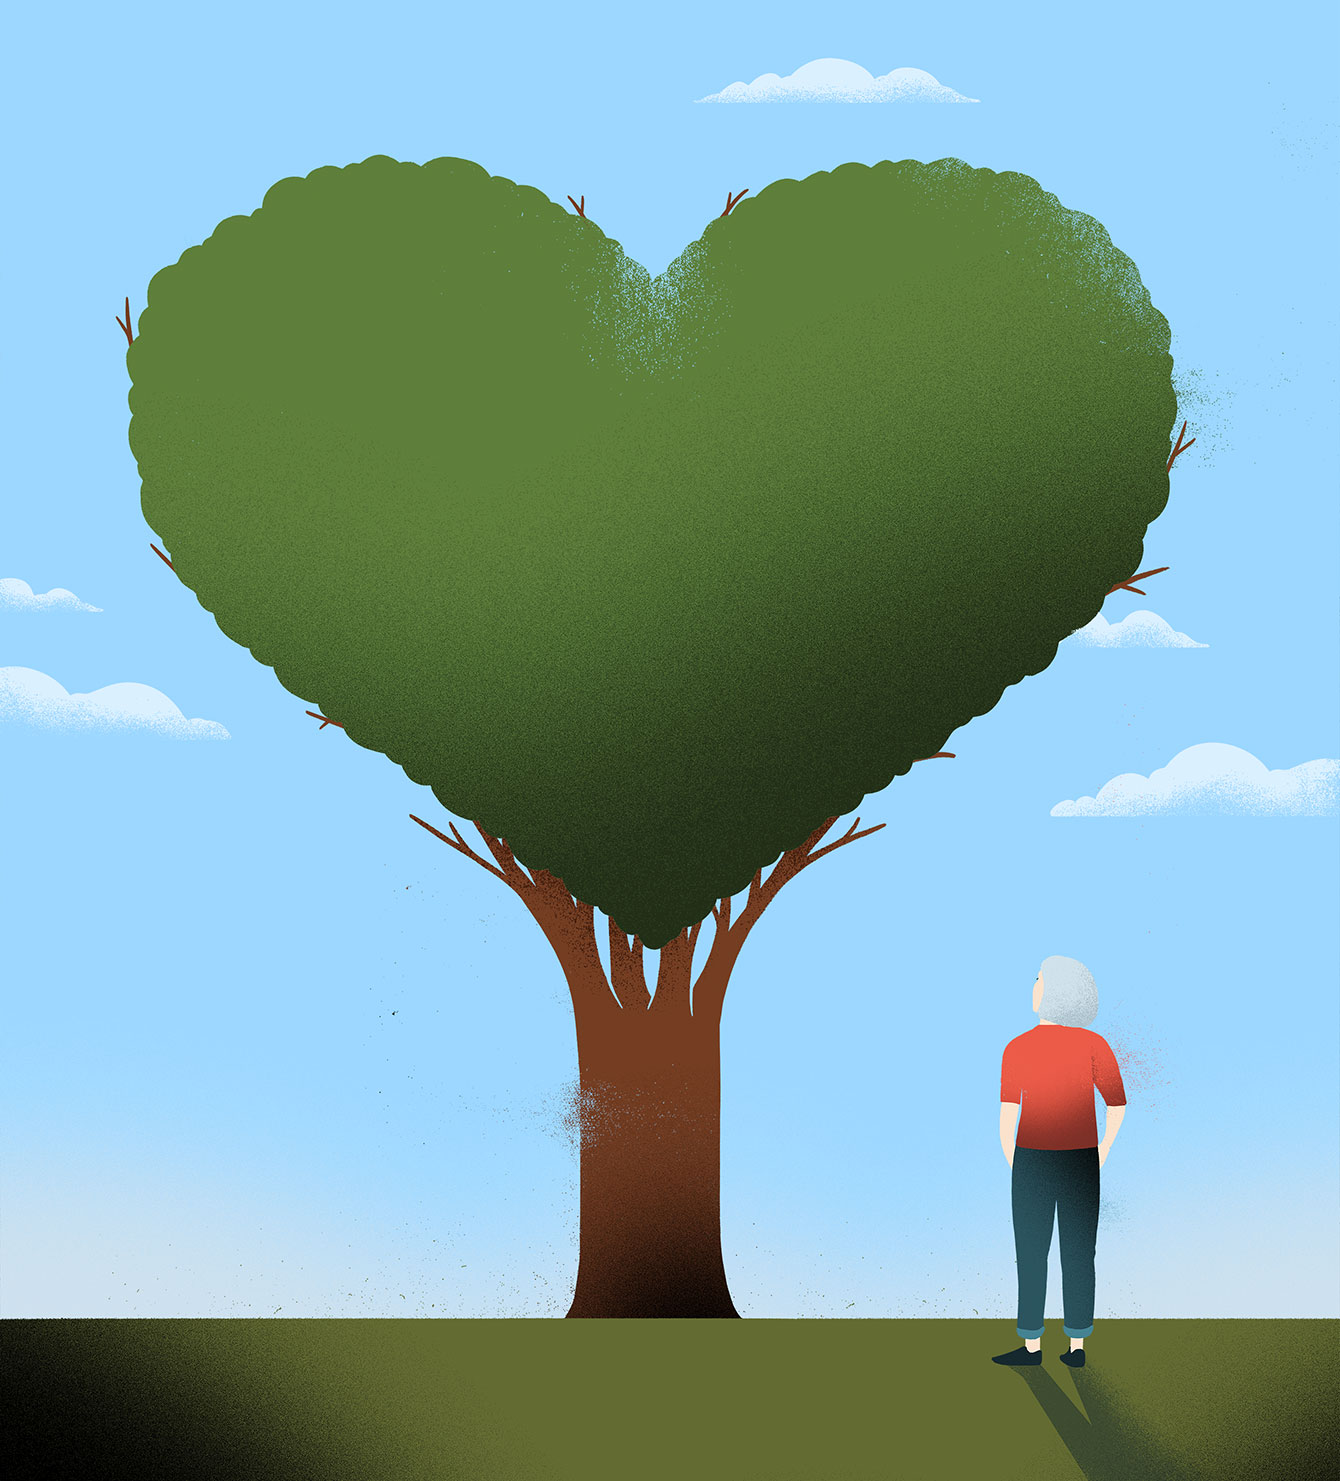 Illustration of a man in a red shirt and jeans outside, looking up at a tree shaped like a heart